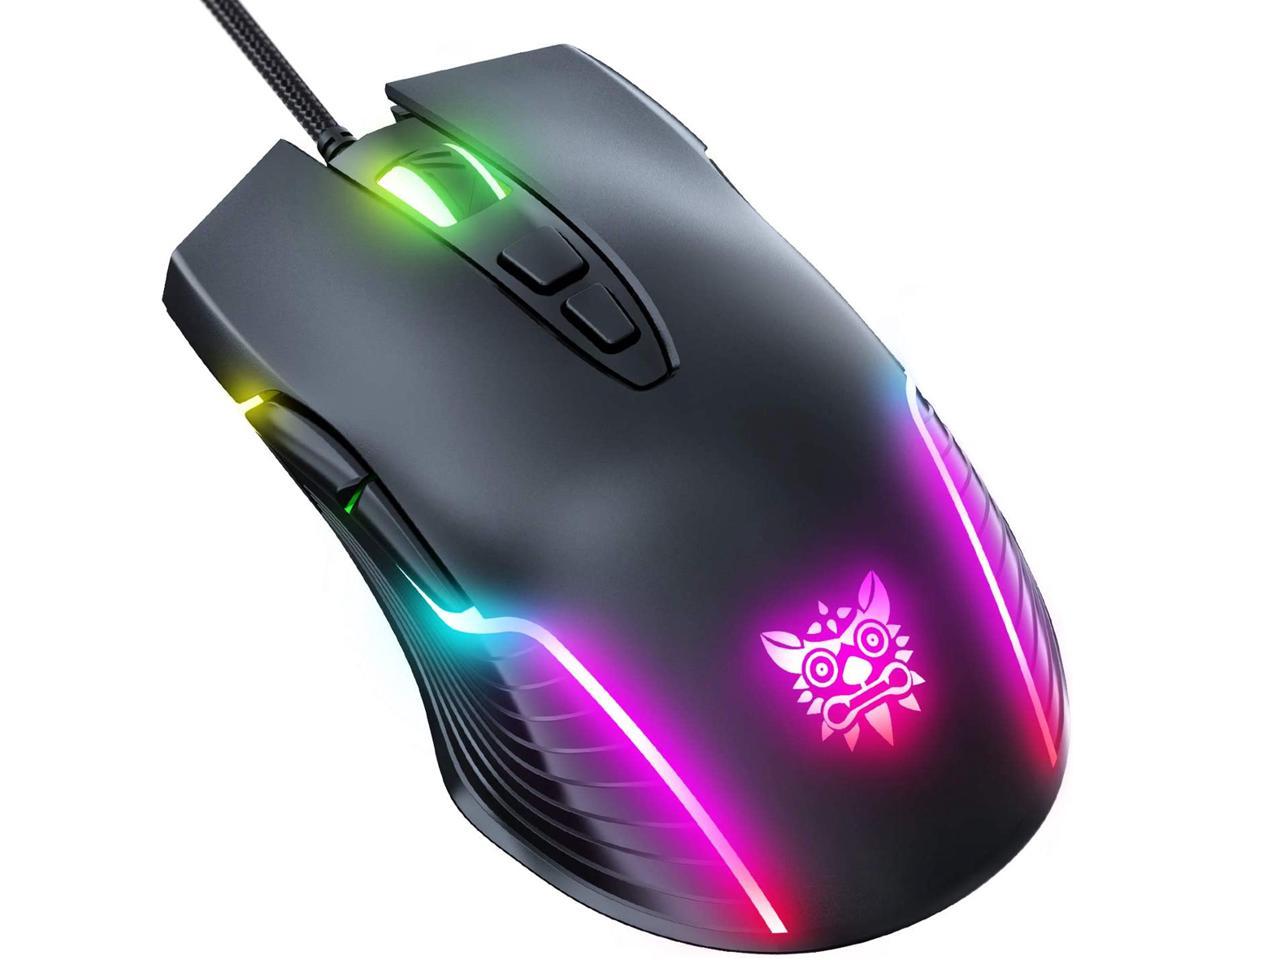 ONIKUMA Gaming Mouse 6400 DPI & Multiple LED Light Effect PC Mouse with RGB Lighting USB Wired Mouse Optical for Pro Gamer (Black)